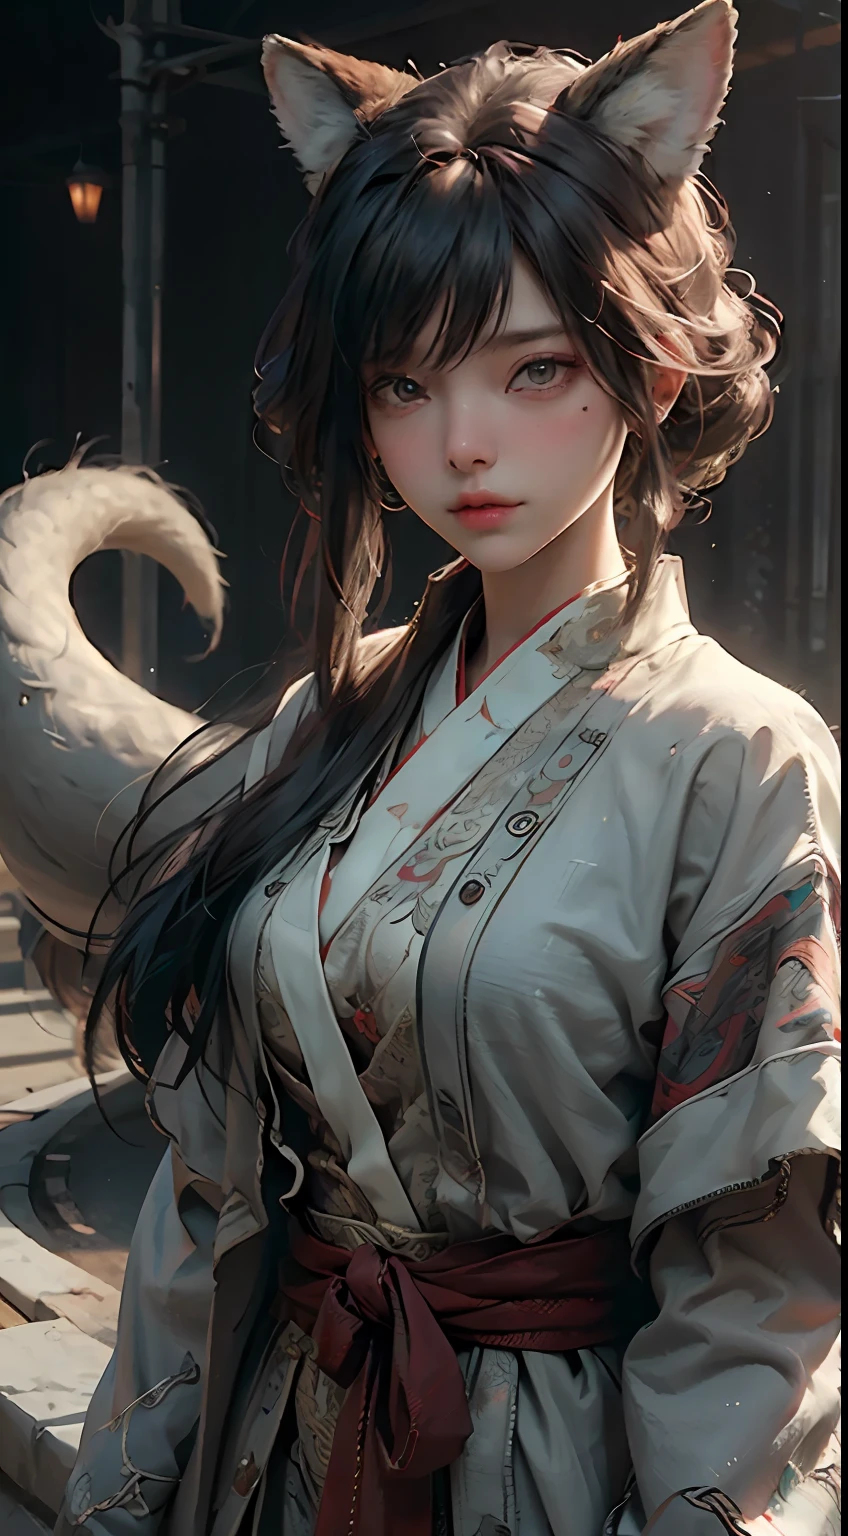 (Best Quality), ((Masterpiece)), (Detail: 1.4), 3D, Nine-Tailed Fox, Delicate Fox Ears, HDR (High Dynamic Range), Ray Tracing, NVIDIA RTX, Super-Resolution, Unreal 5, Subsurface Scattering, PBR Texture, Post-processing, Anisotropic Filtering, Depth of Field, Maximum Clarity and Clarity, Characters' Clothing and Facial Expressions are all very detailed and show detailed depiction. The expression is very feminine and gives people a breathtaking feeling. Multi-layer textures, albedo and specular mapping, surface shading, accurate simulation of light-material interactions, perfect proportions, Octane Render, two-color light, large aperture, low ISO, white balance, rule of thirds, 8K RAW,